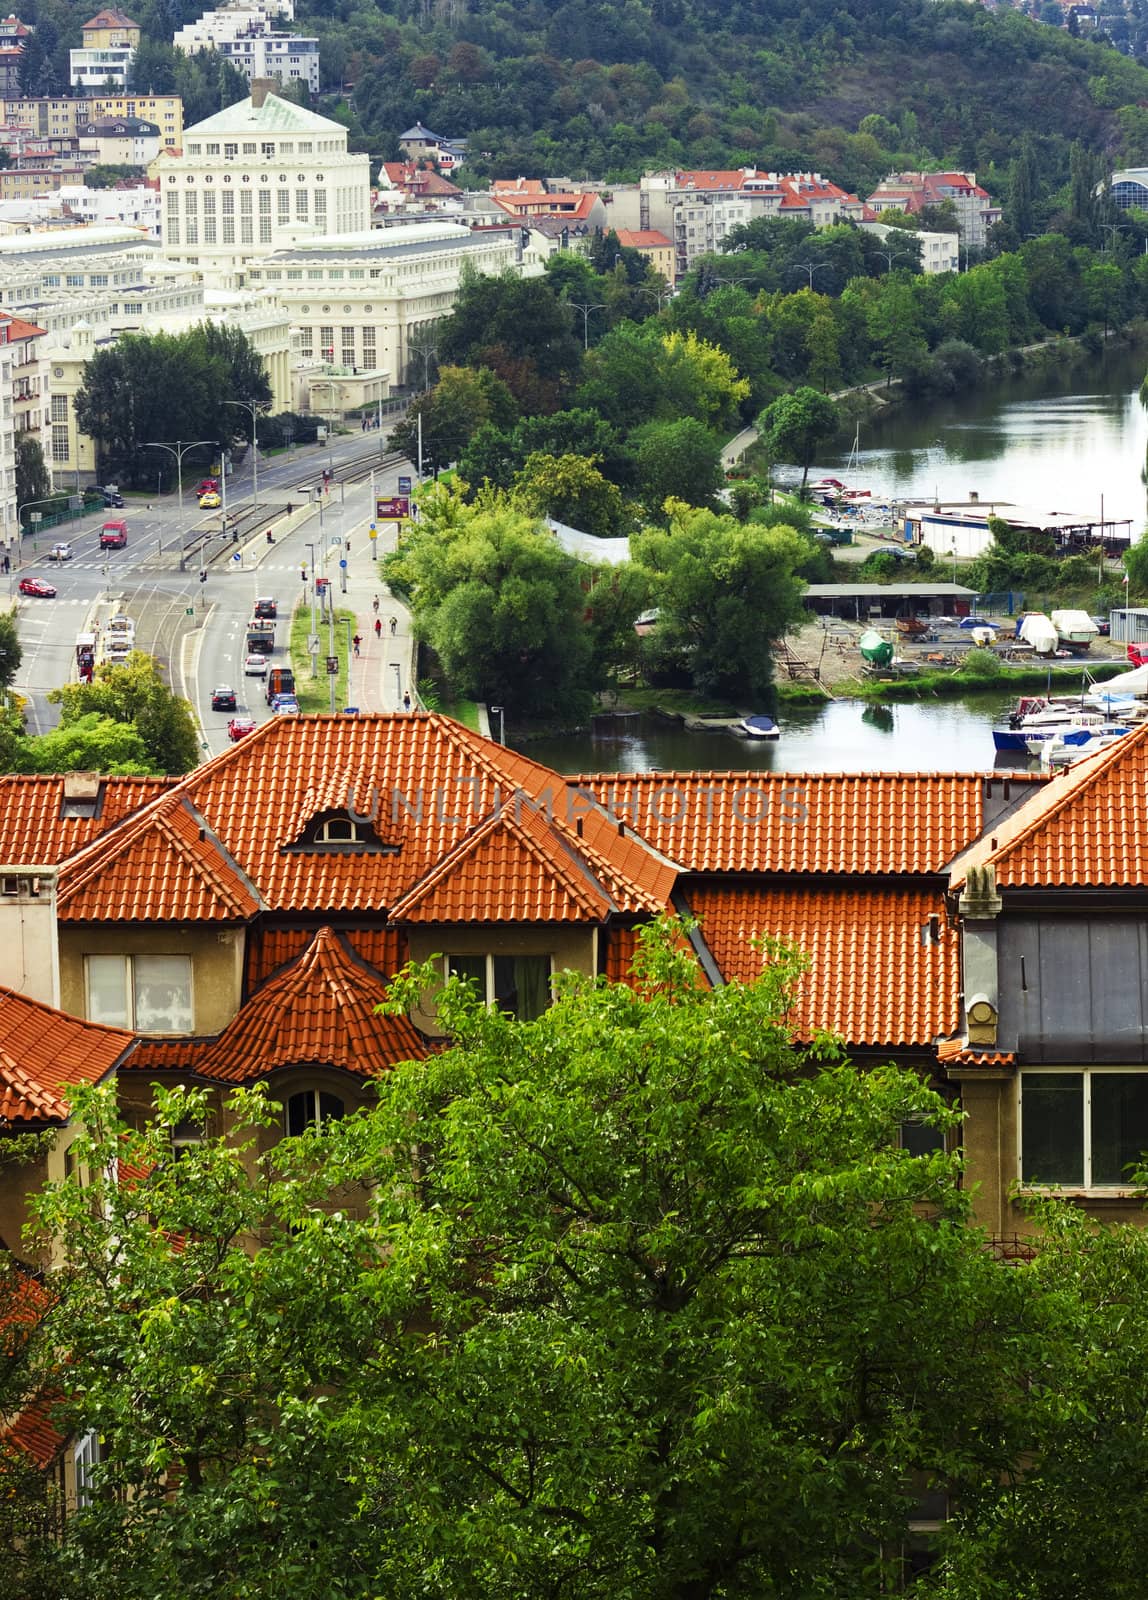 View of an old house against a roadway in Prague. Czech Republic